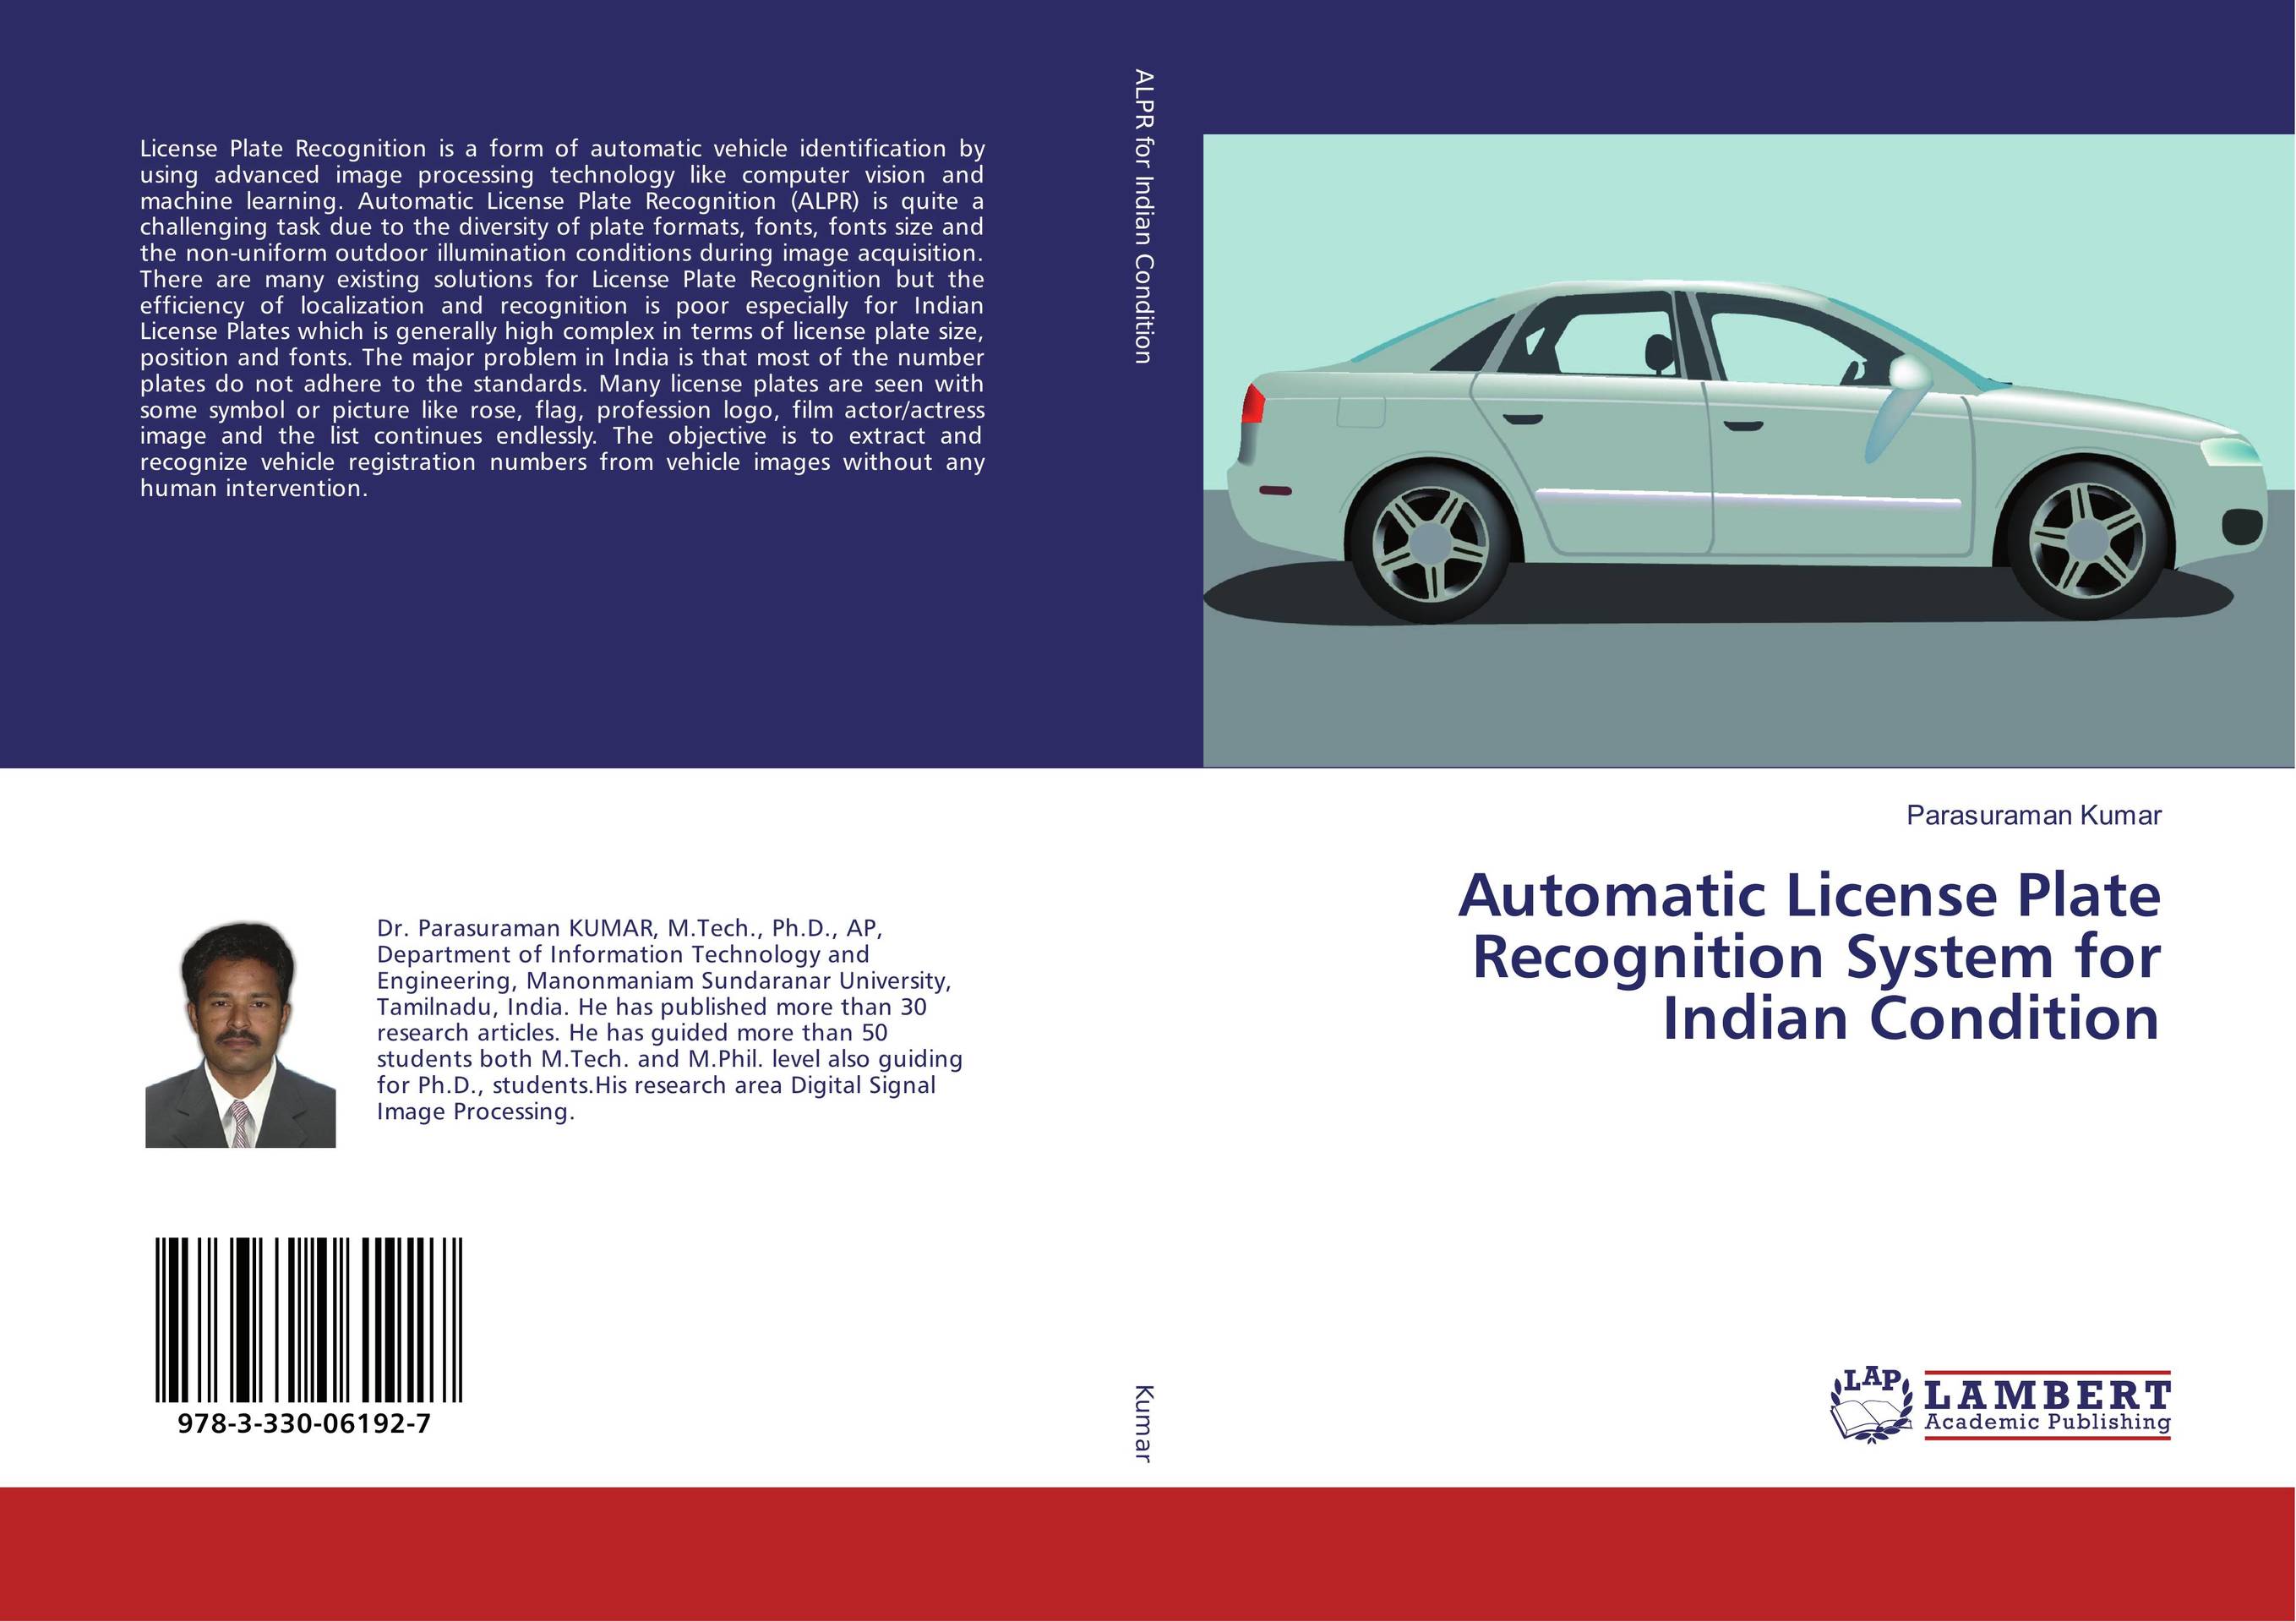 Automation license